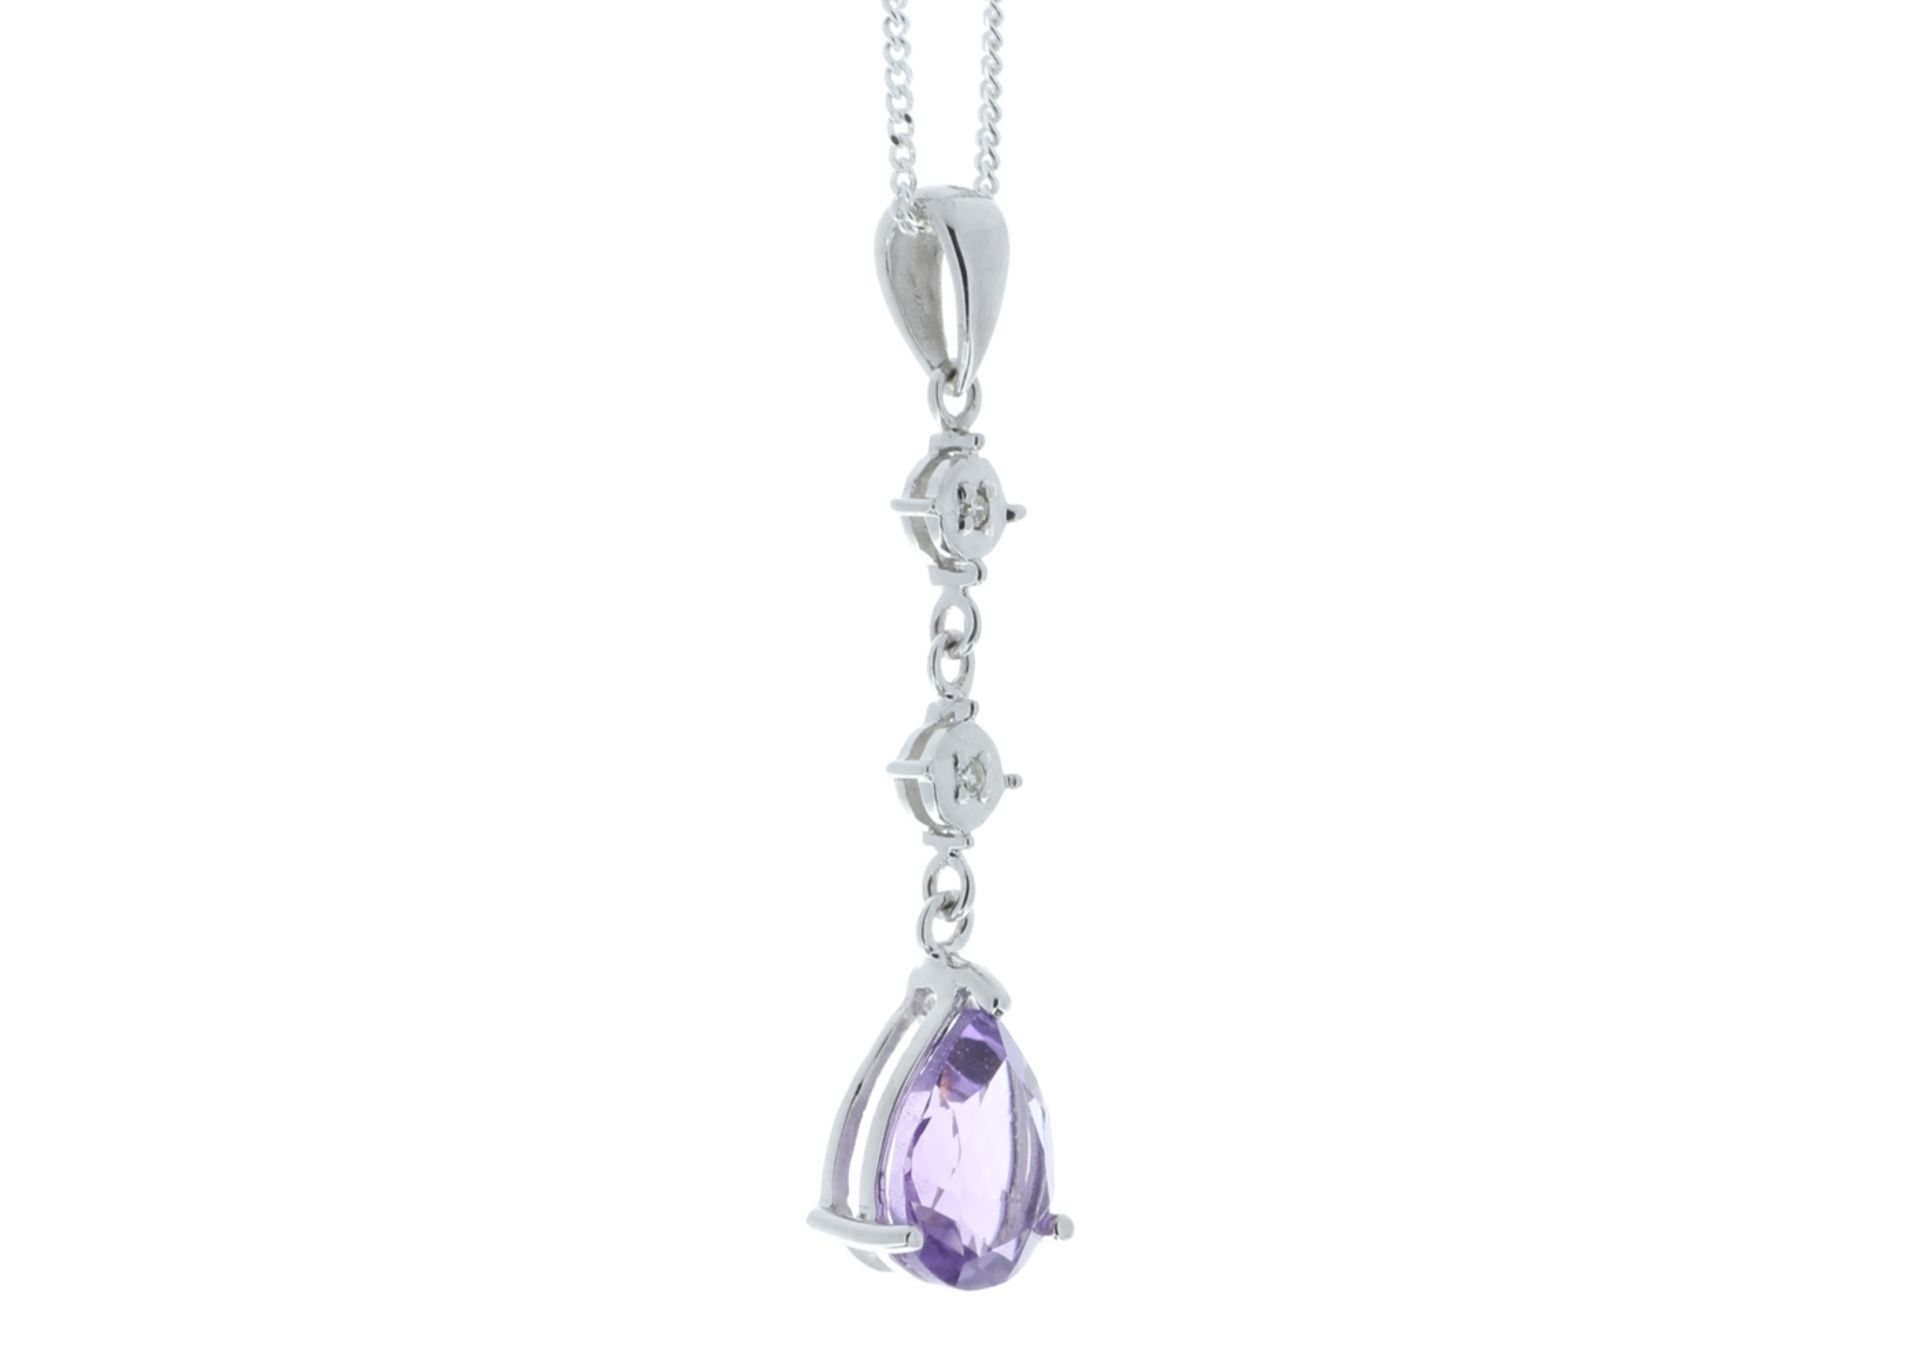 9ct White Gold Amethyst And Diamond Pendant 0.01 Carats - Valued by GIE £560.00 - This is classic - Image 2 of 5